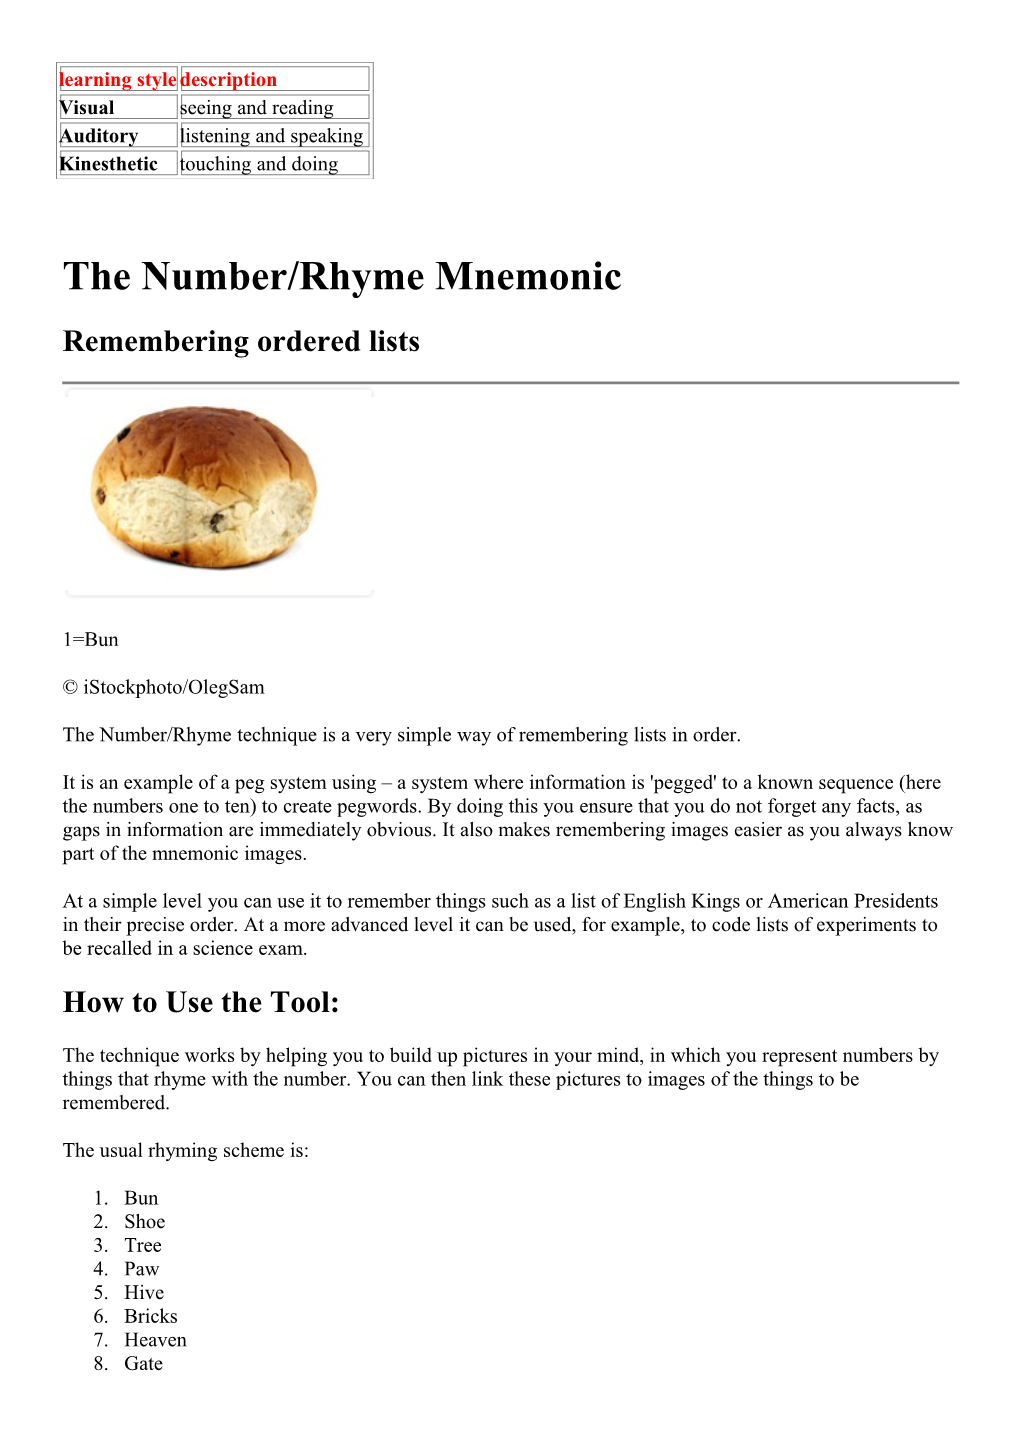 The Number/Rhyme Mnemonic